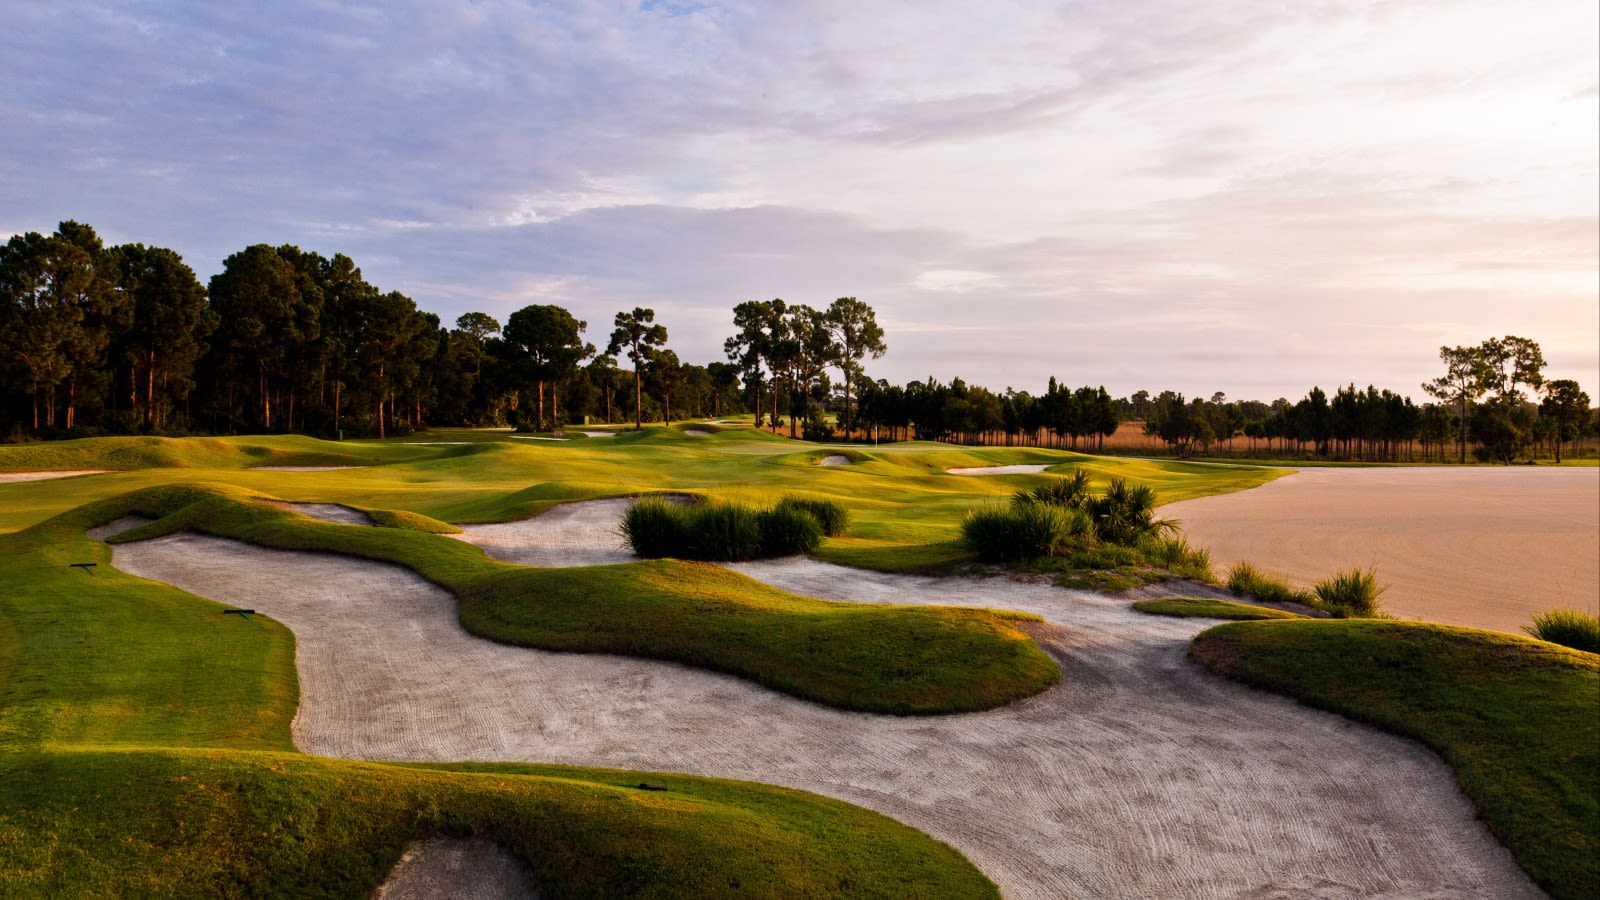 PGA Golf Club's Dye Course in Port St. Lucie, Florida.